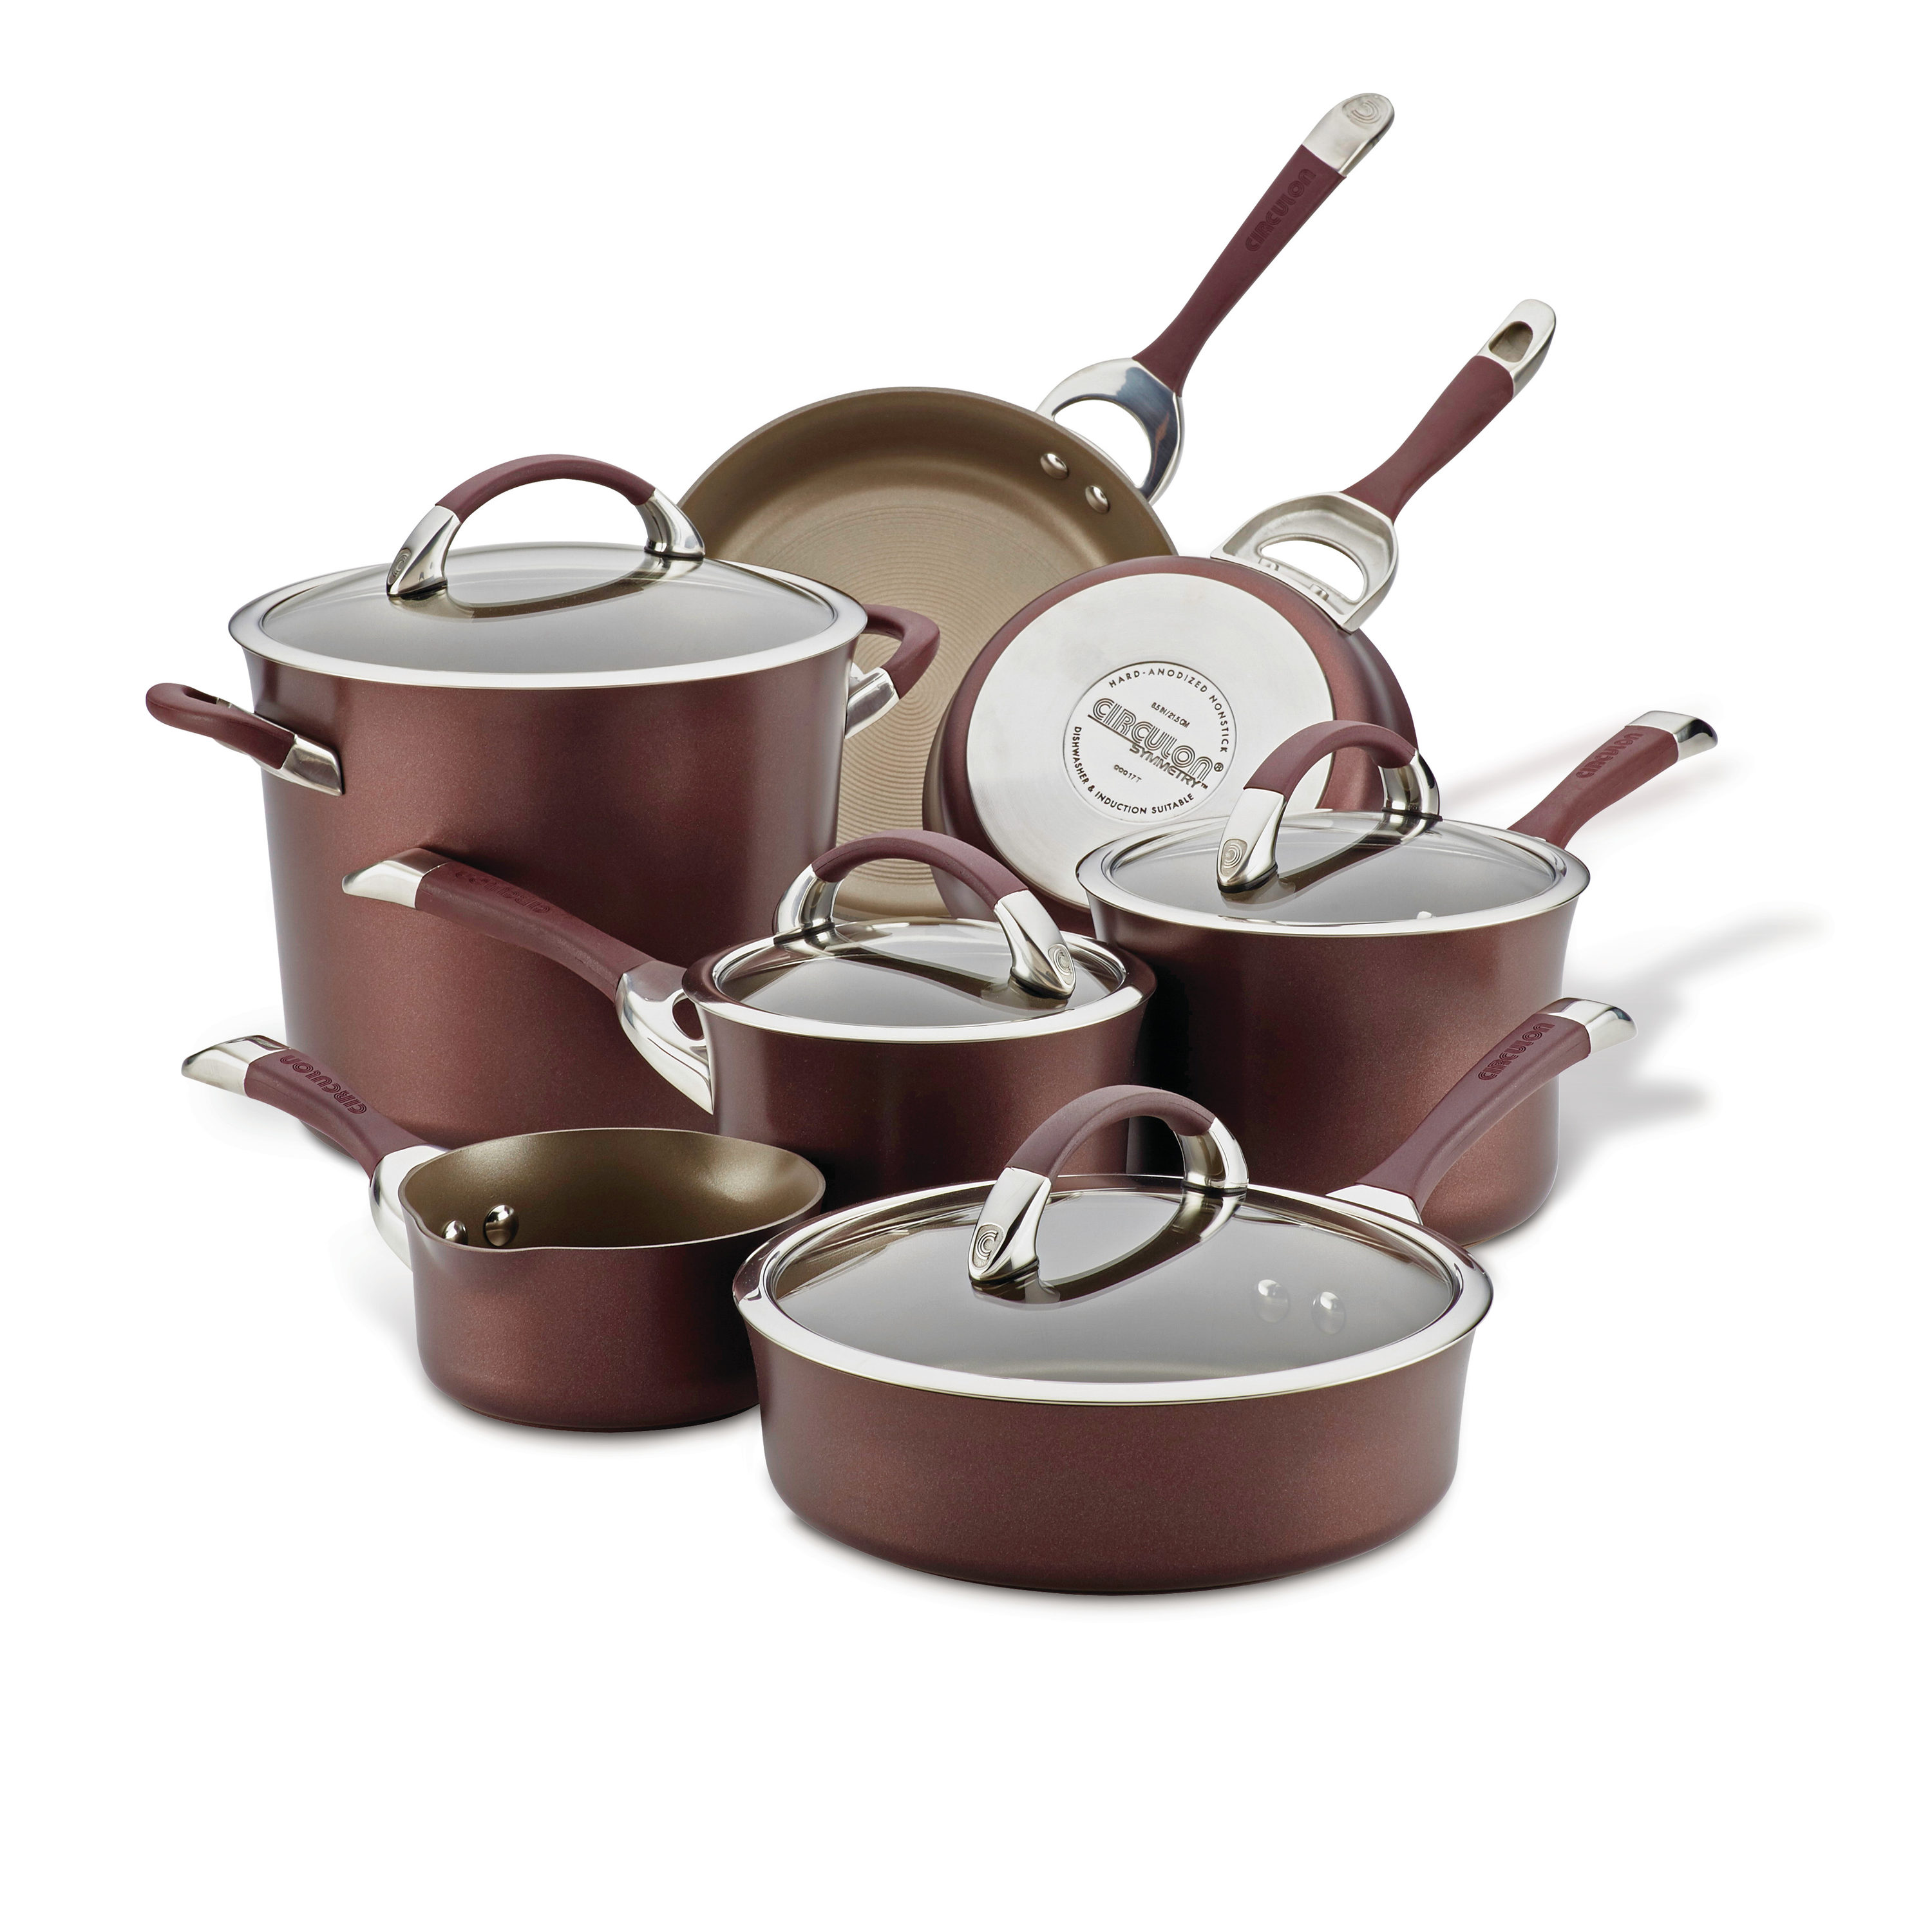 Circulon Symmetry Hard-Anodized Nonstick Cookware Induction Pots and Pans  Set, 4-Piece, Chocolate - Macy's